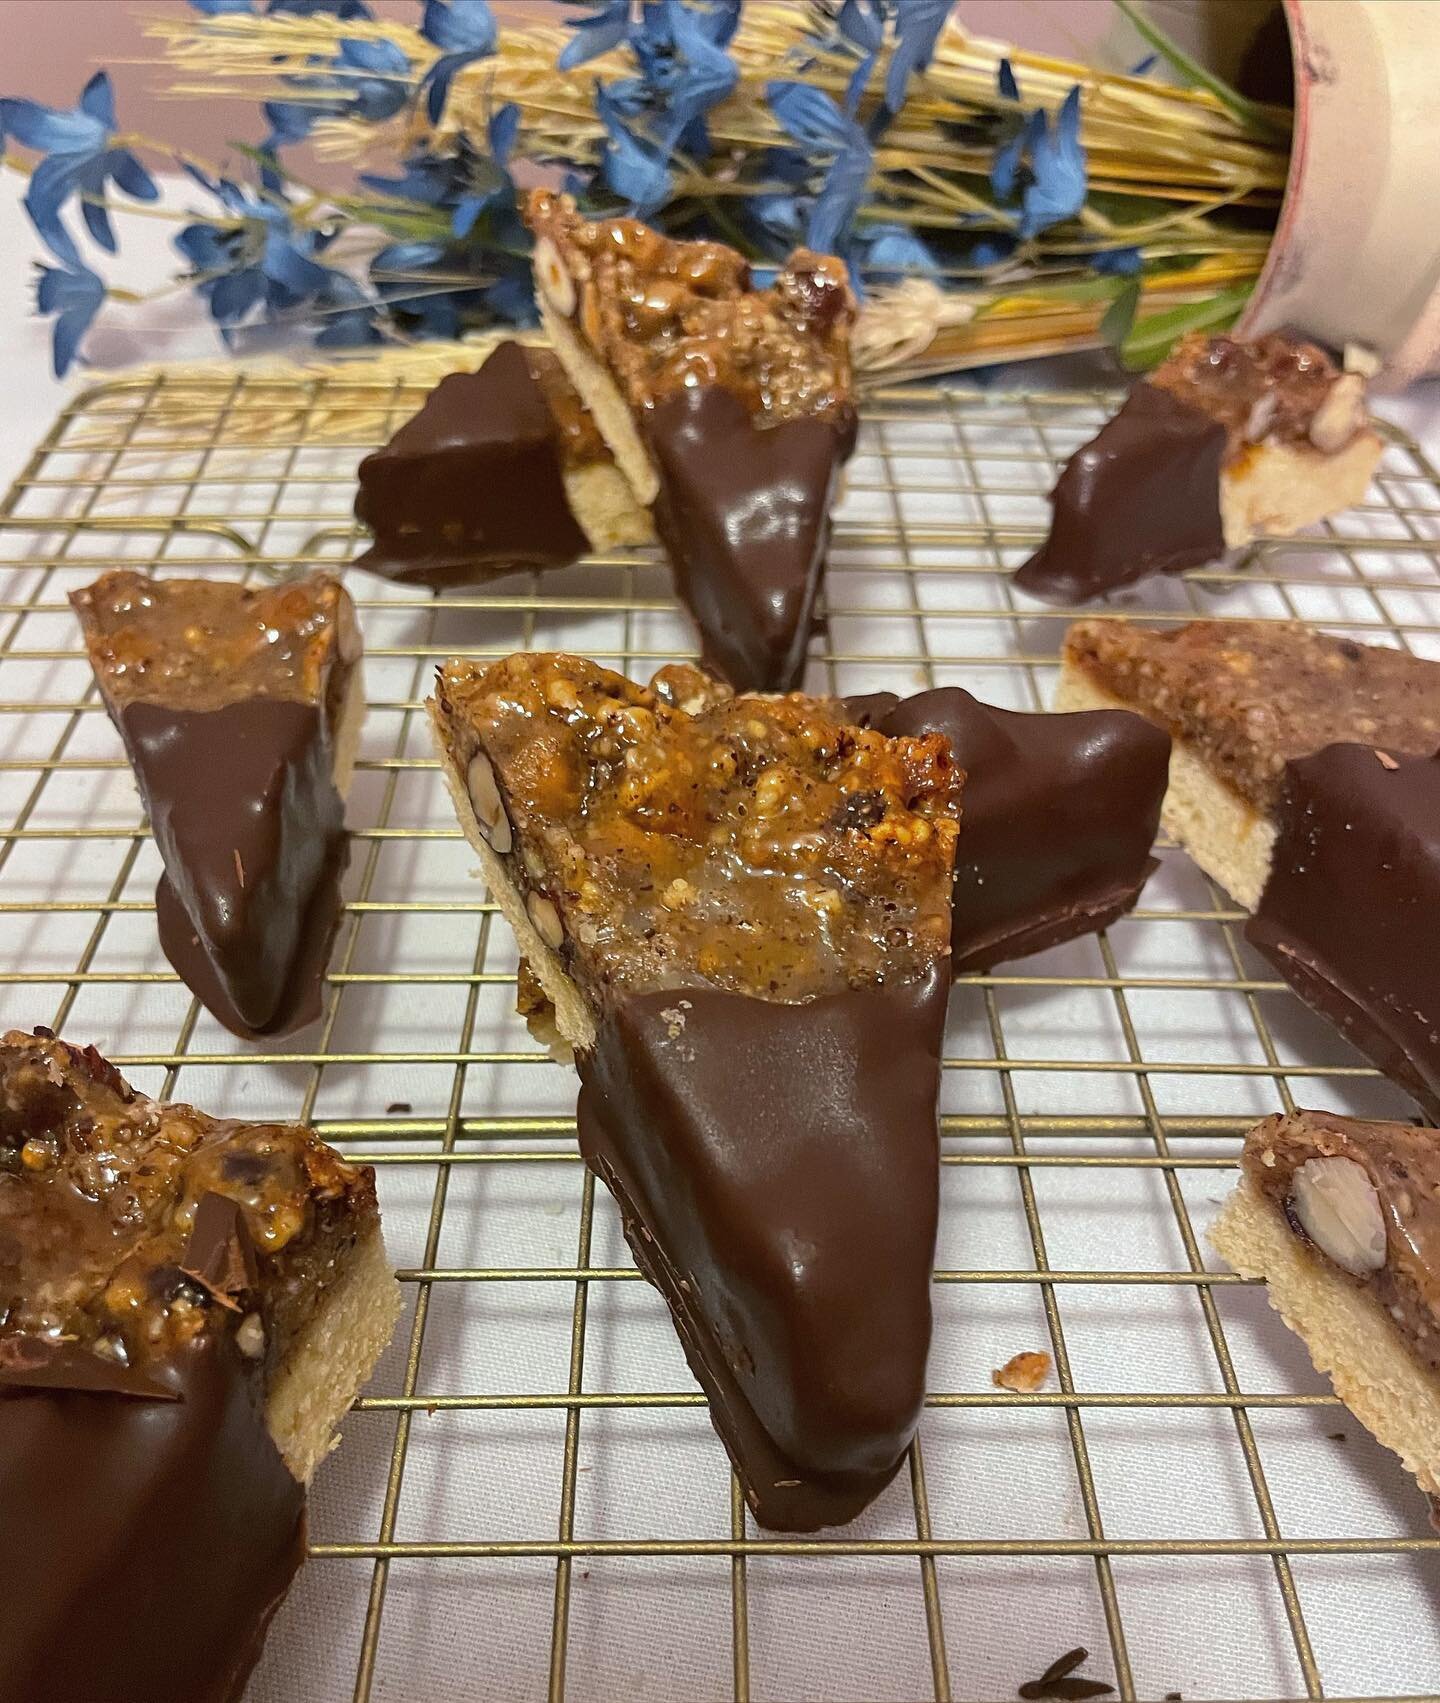 Nussecken

German nut corners are layered with  buttery shortbread, apricot jam, caramelized hazelnuts on top then dipped in chocolate! 

Shortbread Layer:
- 1 1/4cups flour
- 1/2 tsp baking powder
- Pinch of salt
- 1/4 cup sugar
- 1/2 tsp vanilla
- 